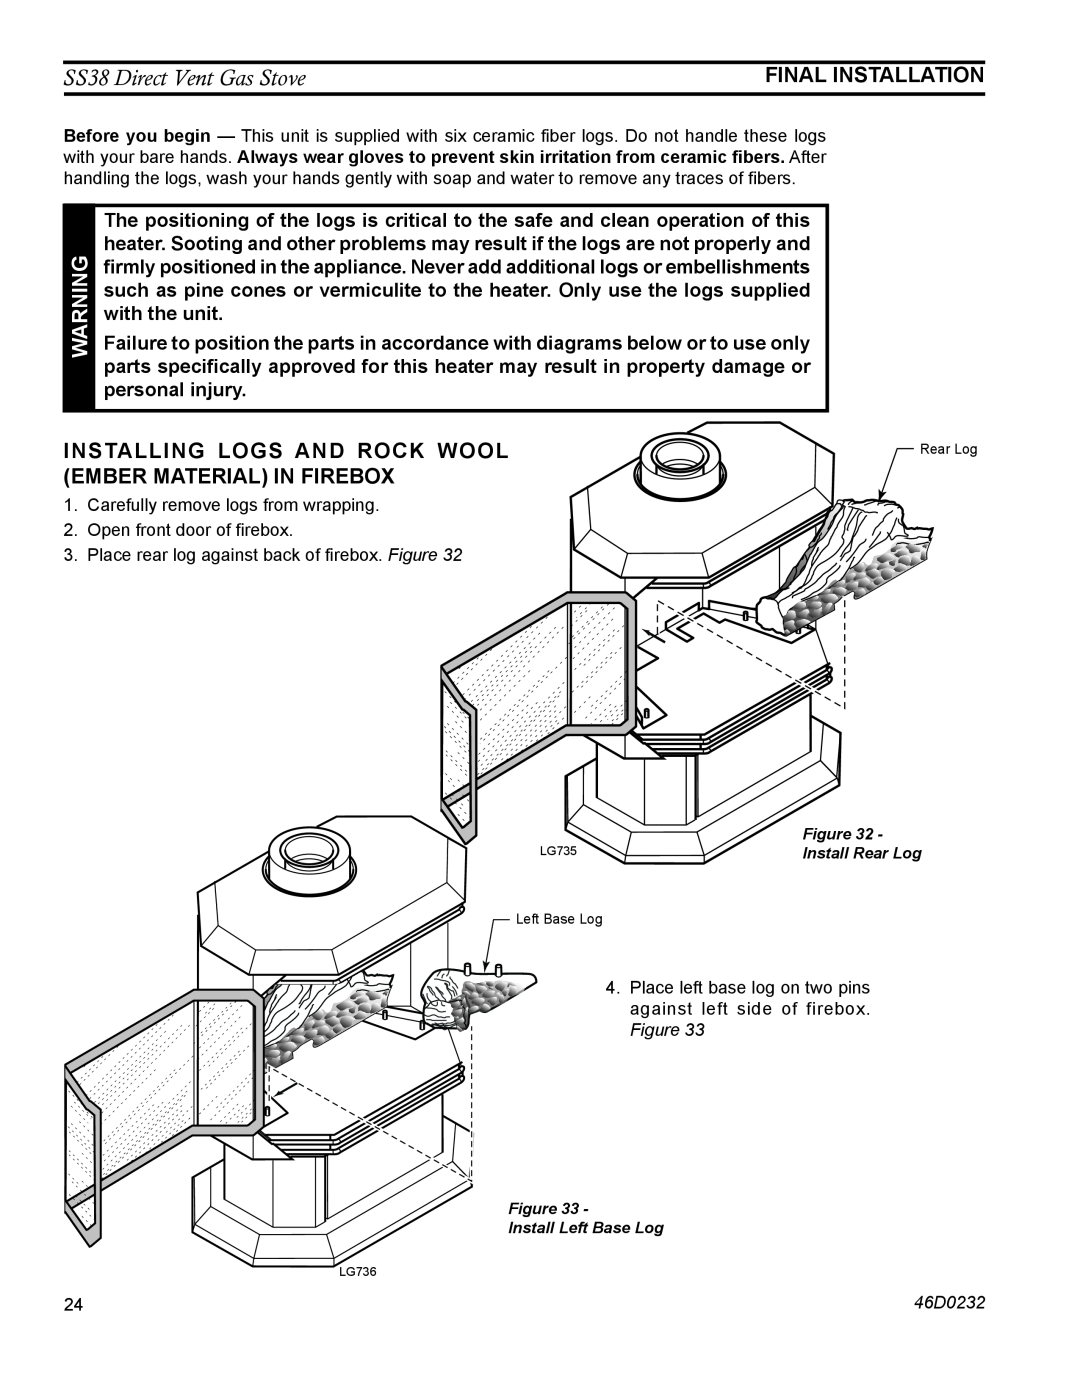 Monessen Hearth operating instructions SS38 Direct Vent Gas Stove, Final Installation 